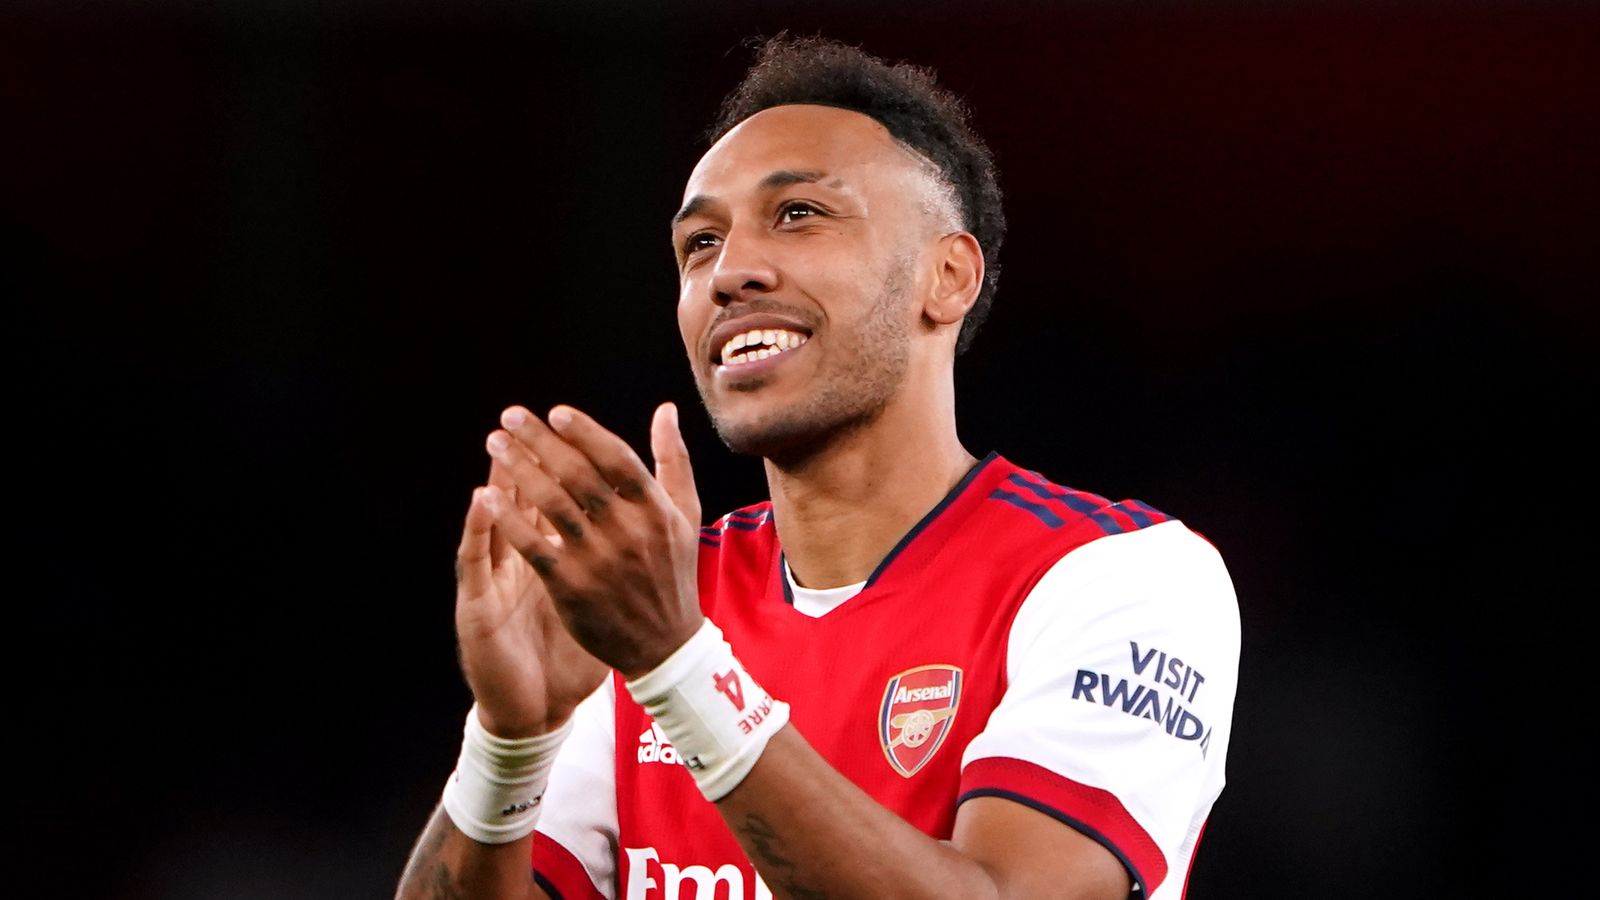 Pierre-Emerick Aubameyang: Arsenal striker says his 'heart is absolutely fine' after cardiac lesions diagnosis at AFCON